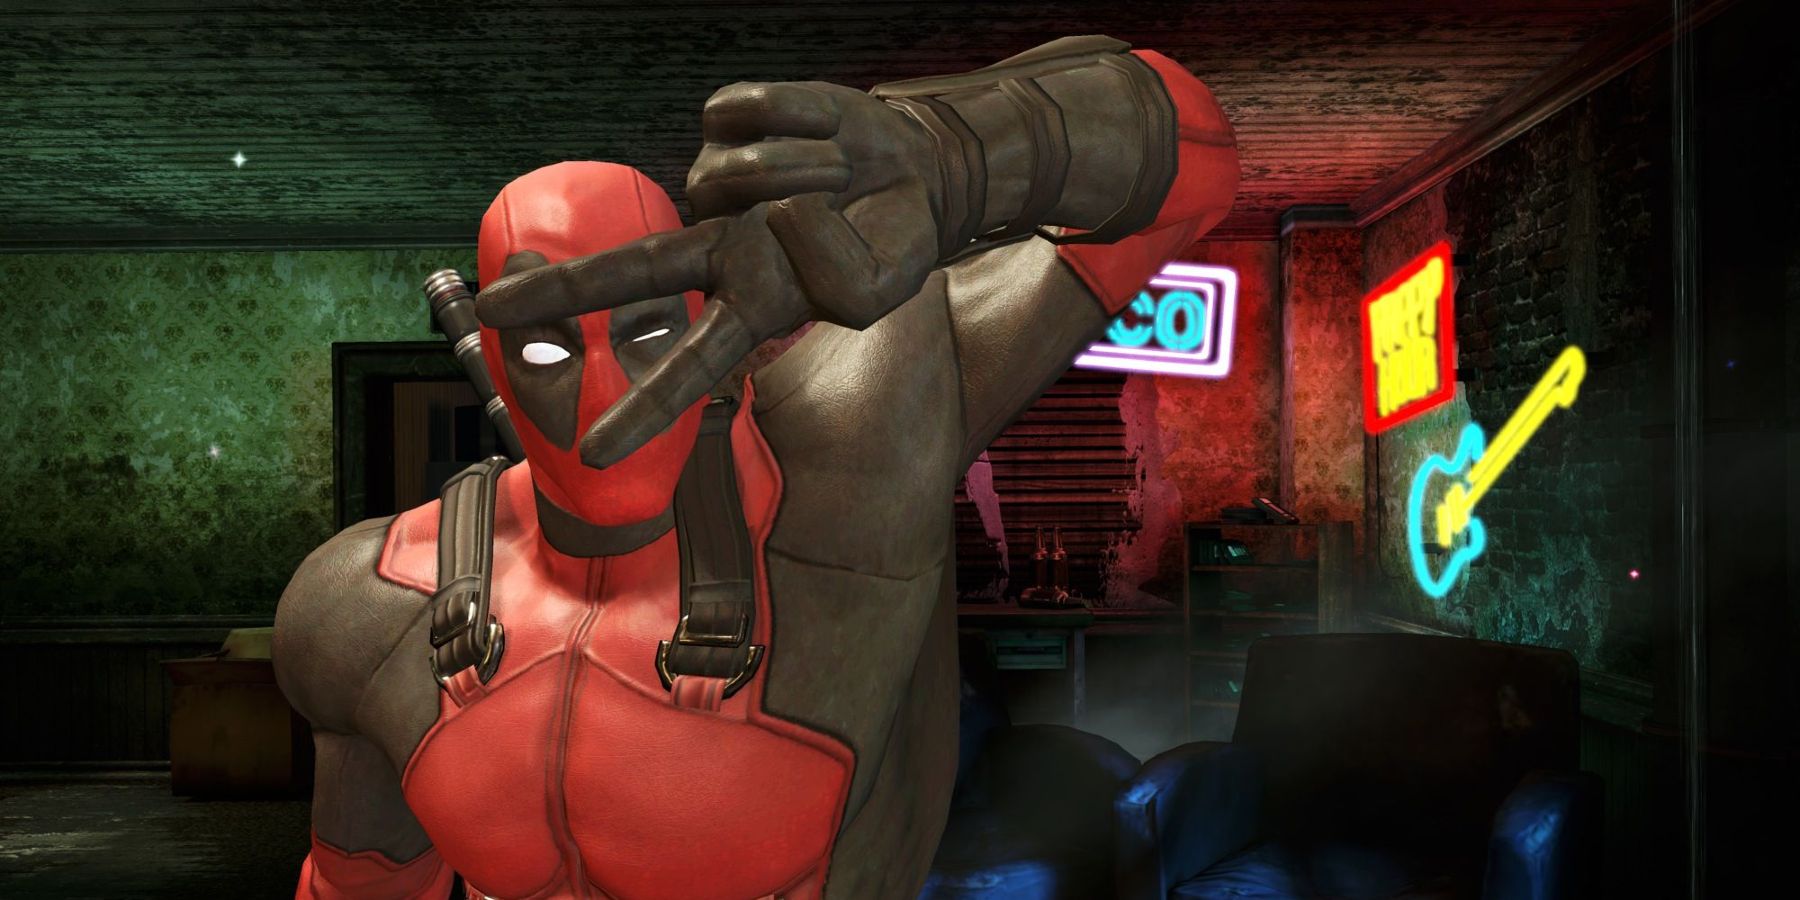 Deadpool breaking the fourth wall in the Deadpool game